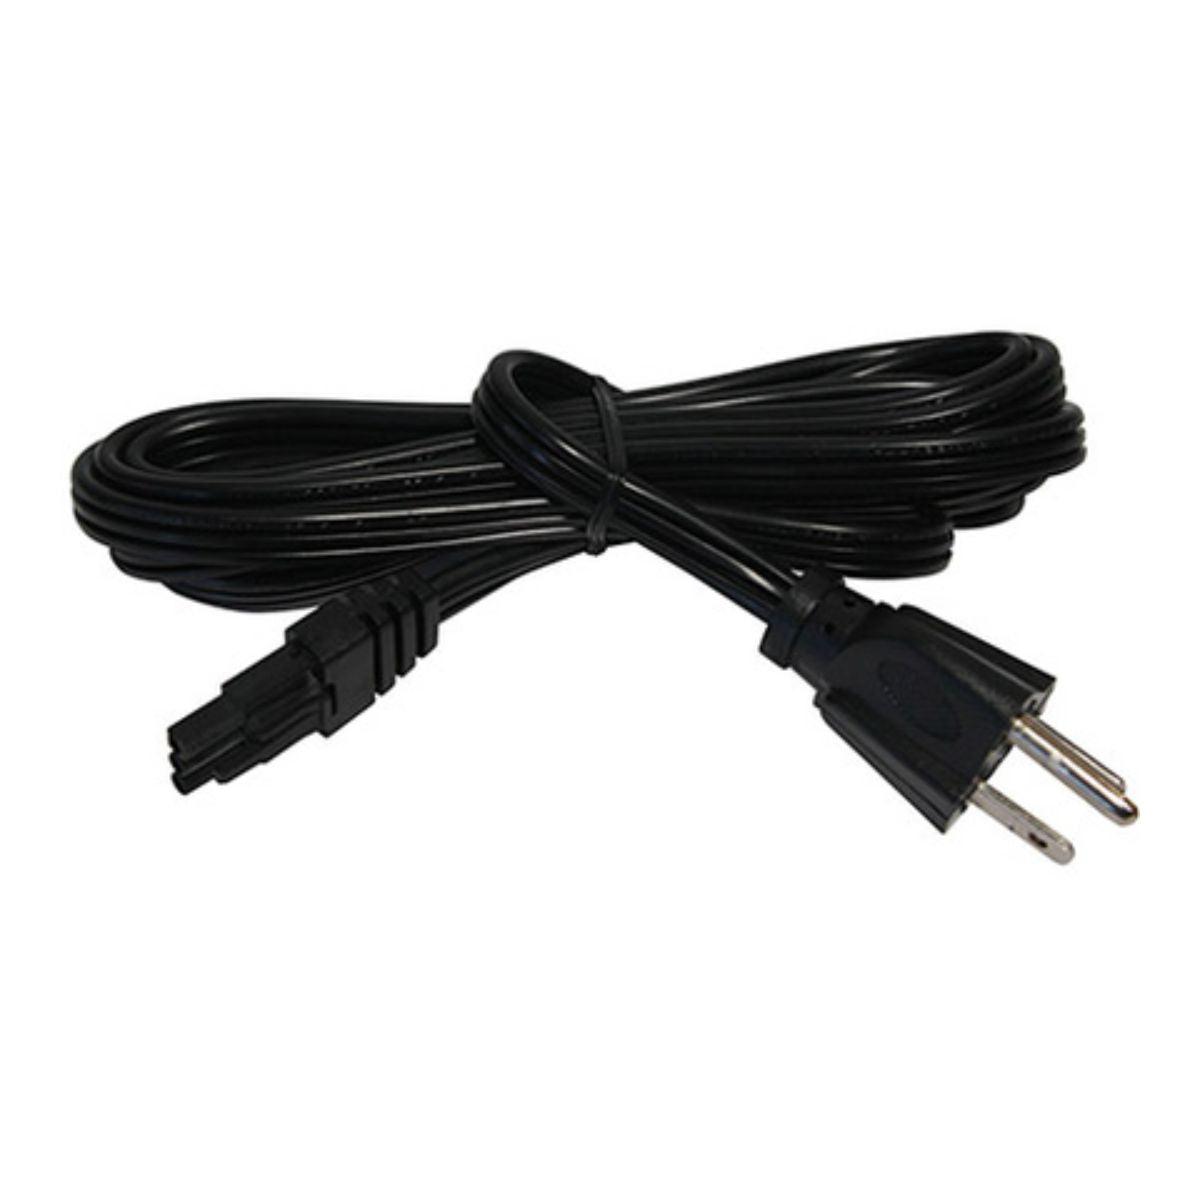 6ft Grounded Plug-in Power Cord For Undercabinet Lights, Black Finish - Bees Lighting